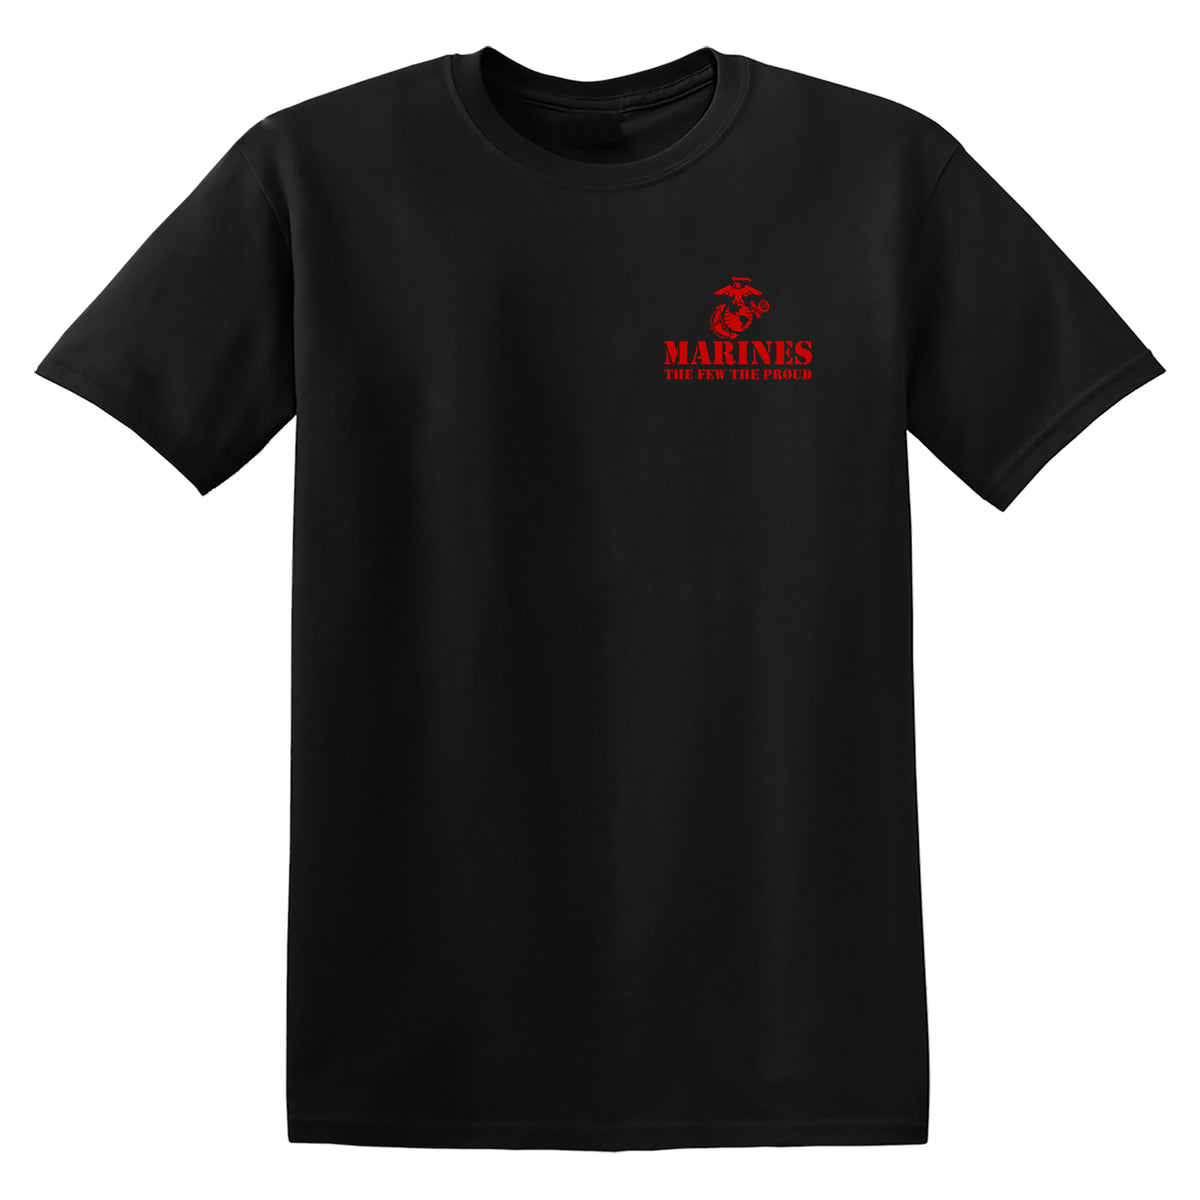 Closeout The Few The Proud Red Chest Seal Tee